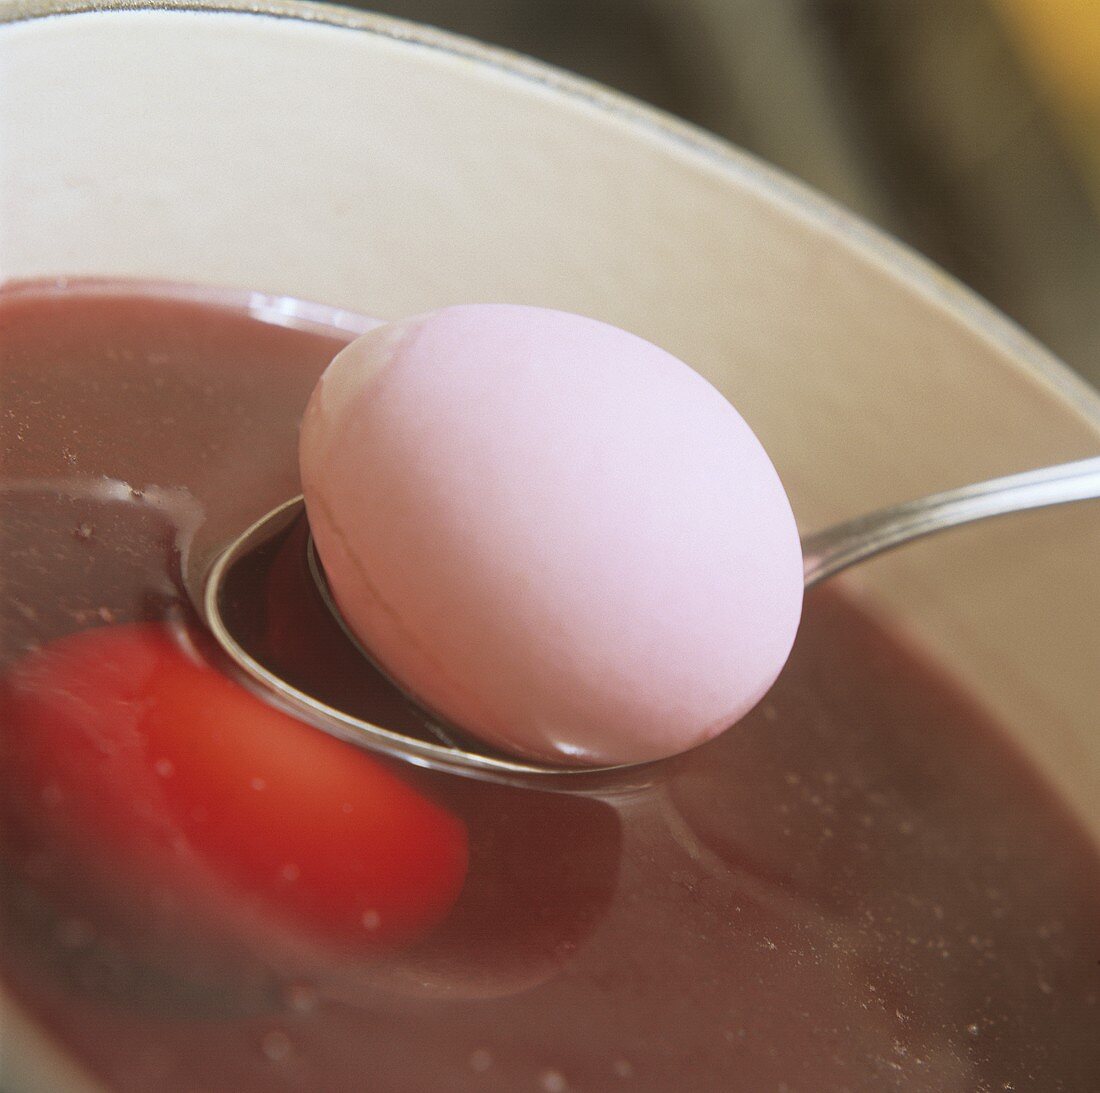 Colouring eggs naturally with beetroot juice